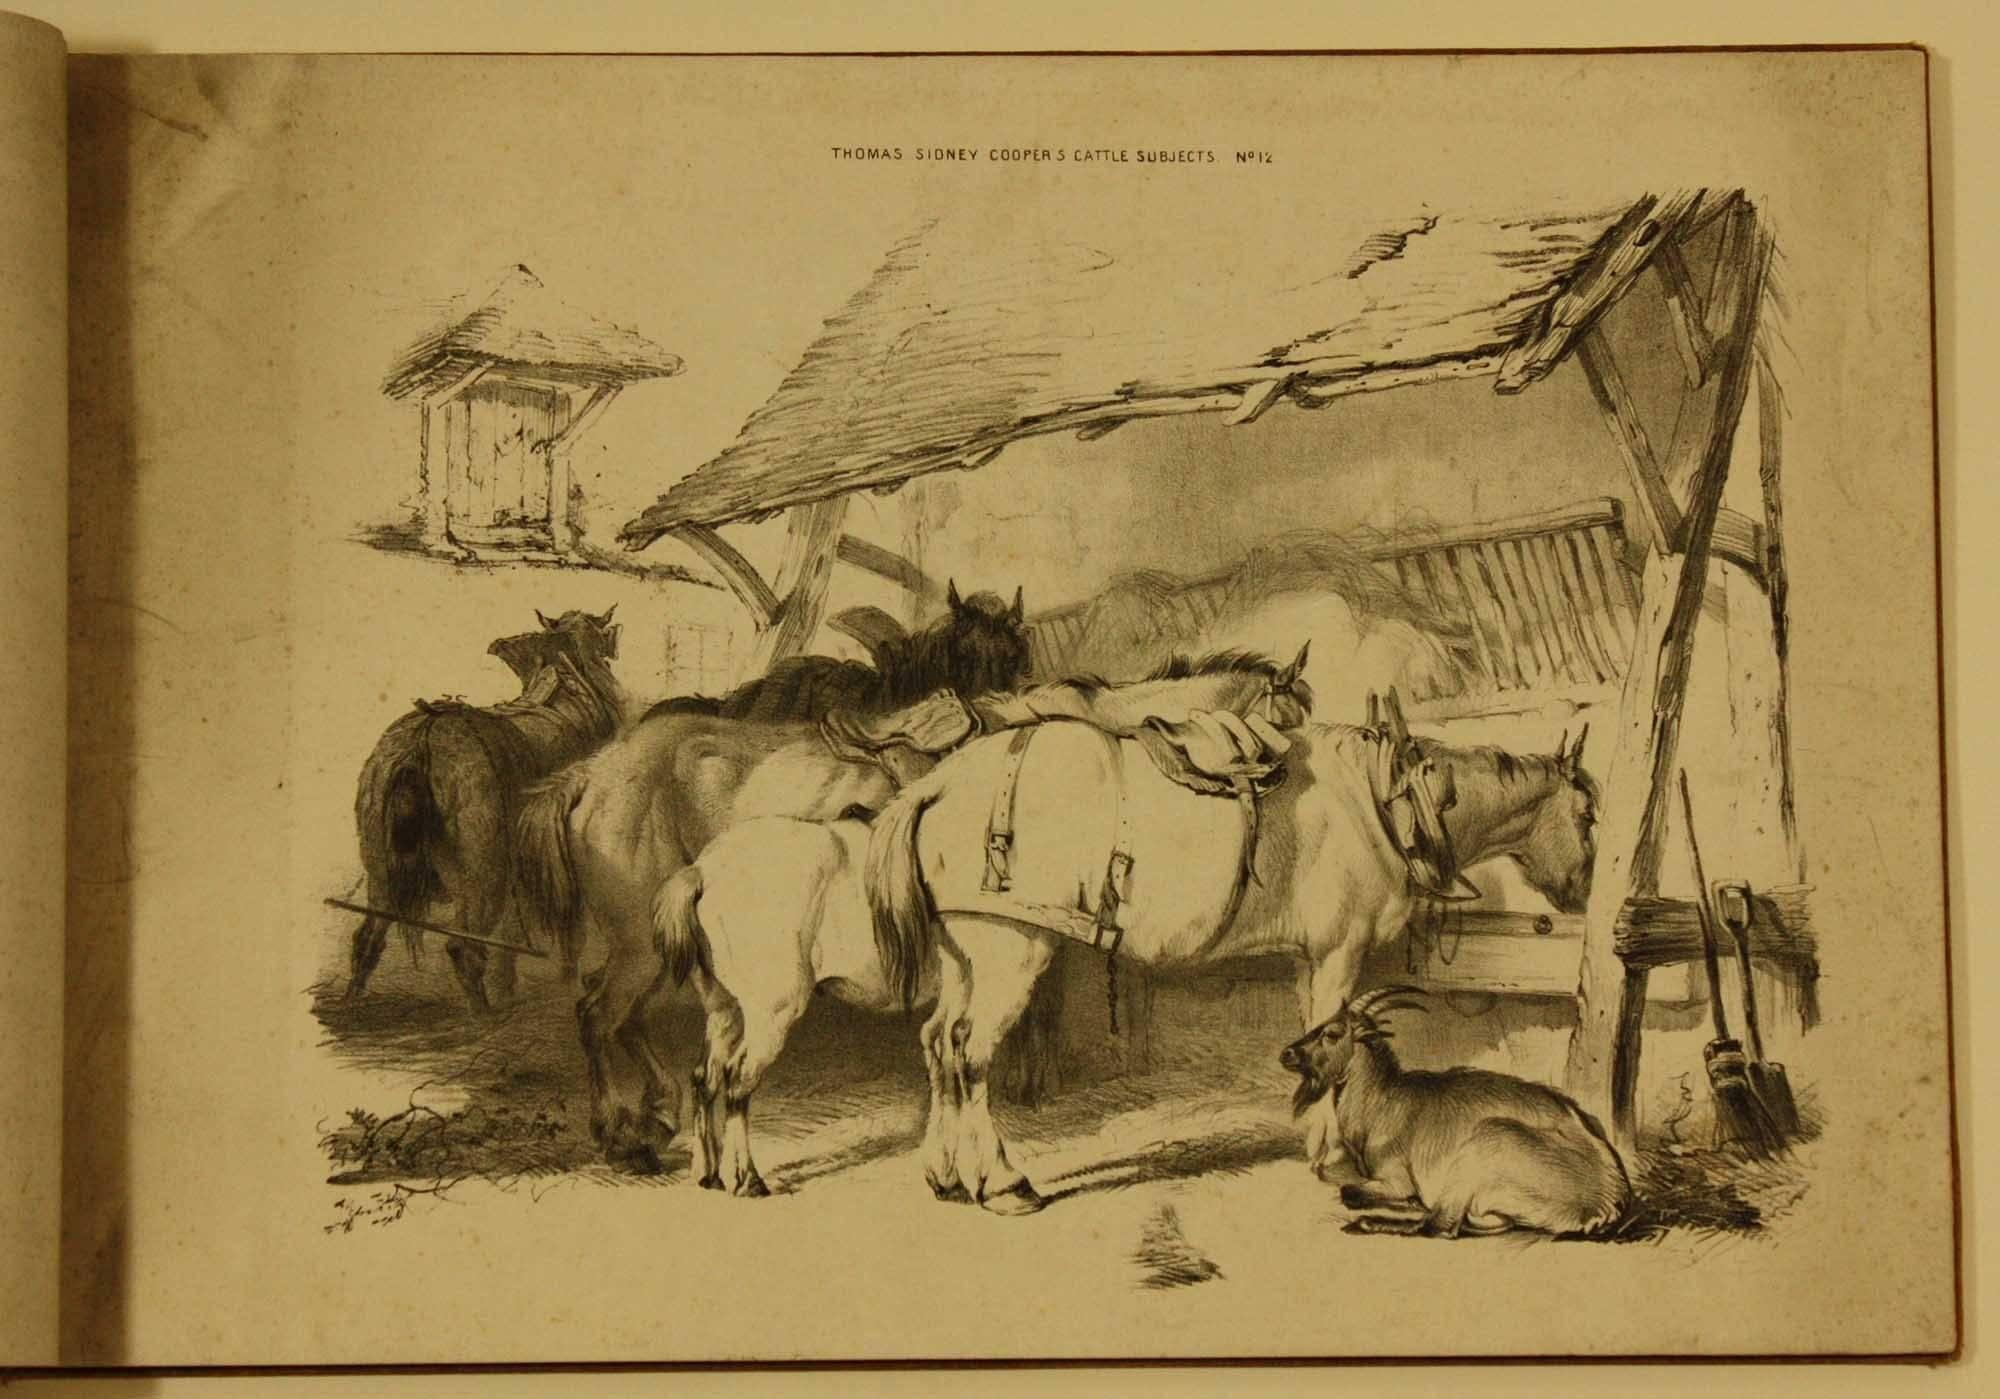 COOPER, Thomas Sidney  Groups of Cattle, Drawn from Nature Book 1839 London - Brown Animal Print by Thomas Sidney Cooper